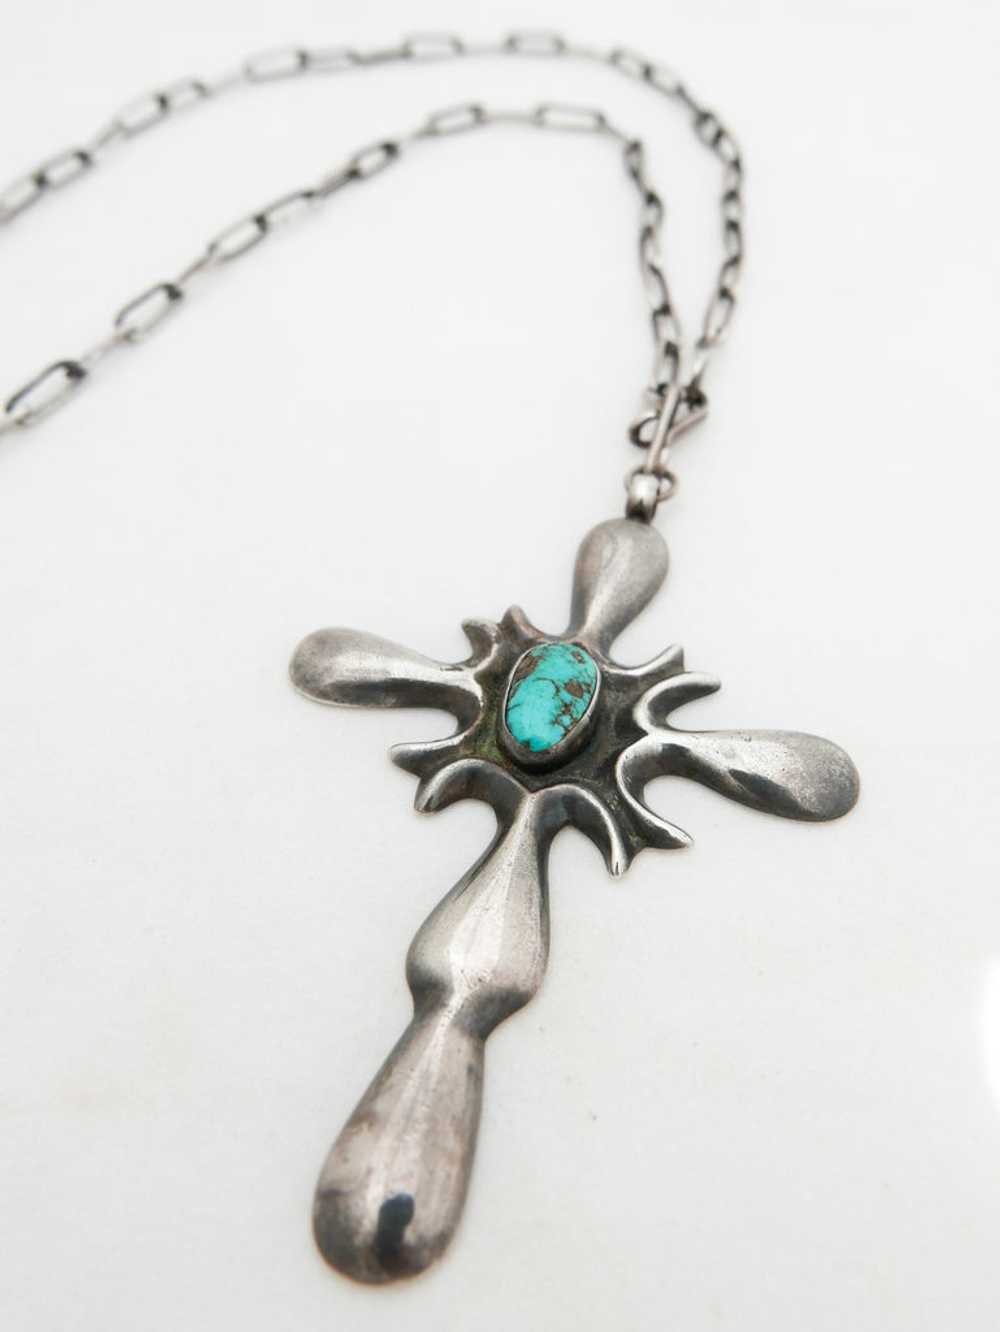 Turquoise & Sterling MCM Cross Necklace - image 2